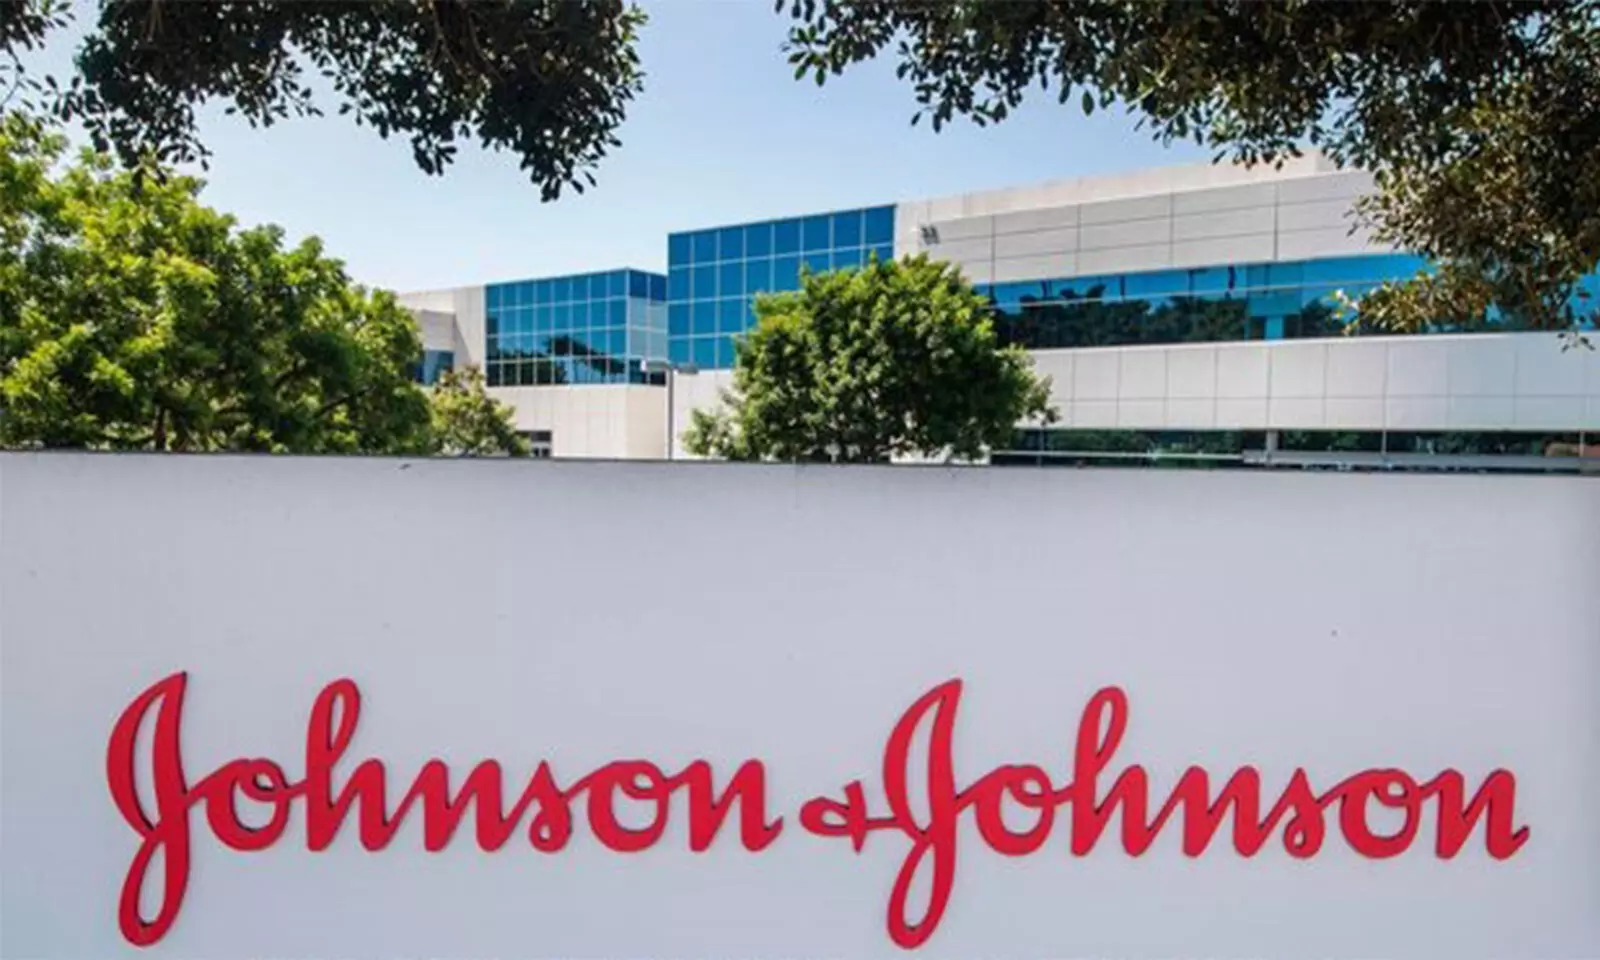 J&J says its single dose protects against breakthrough COVID-19 for up to 6 months